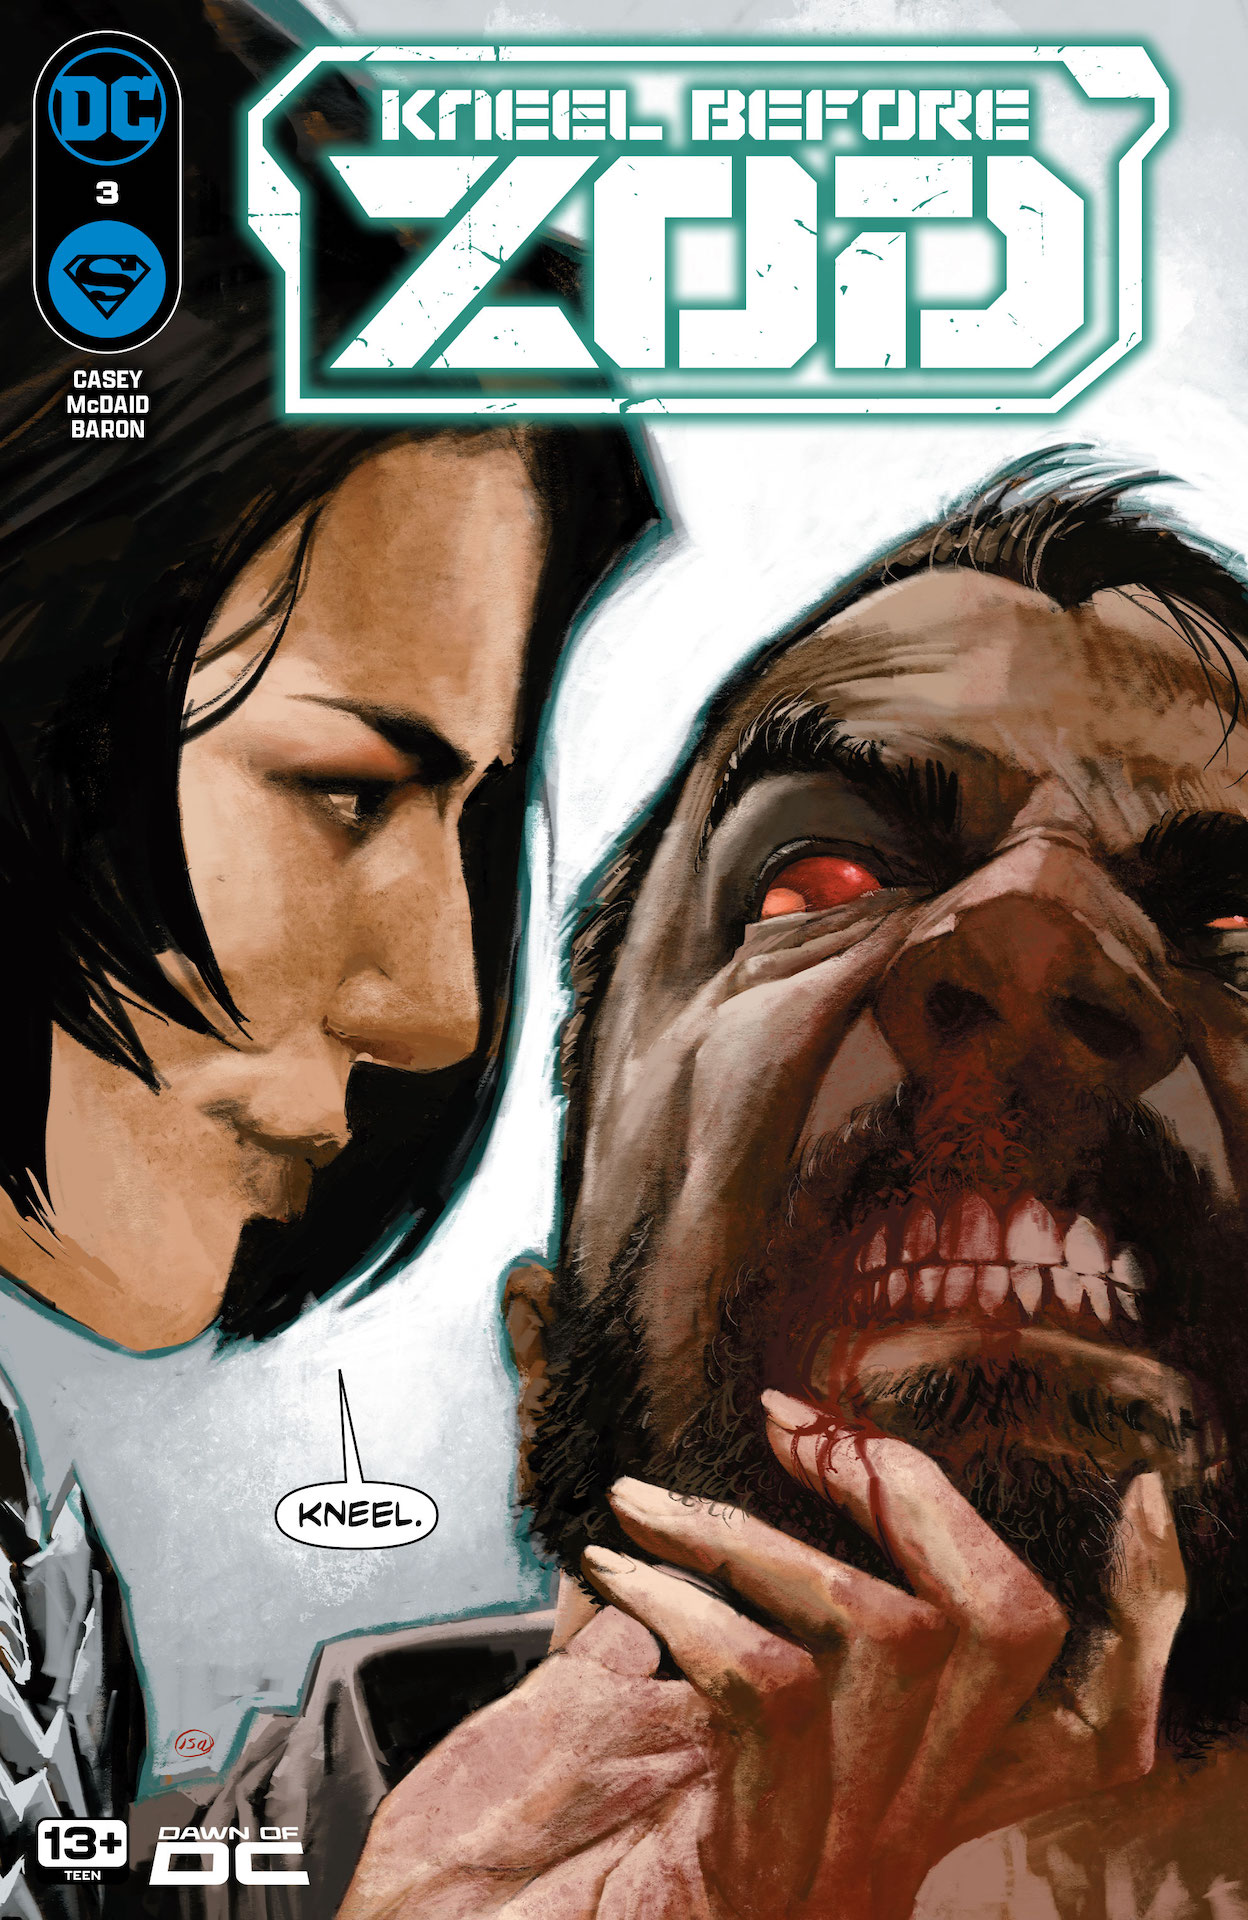 DC Preview: Kneel Before Zod #3